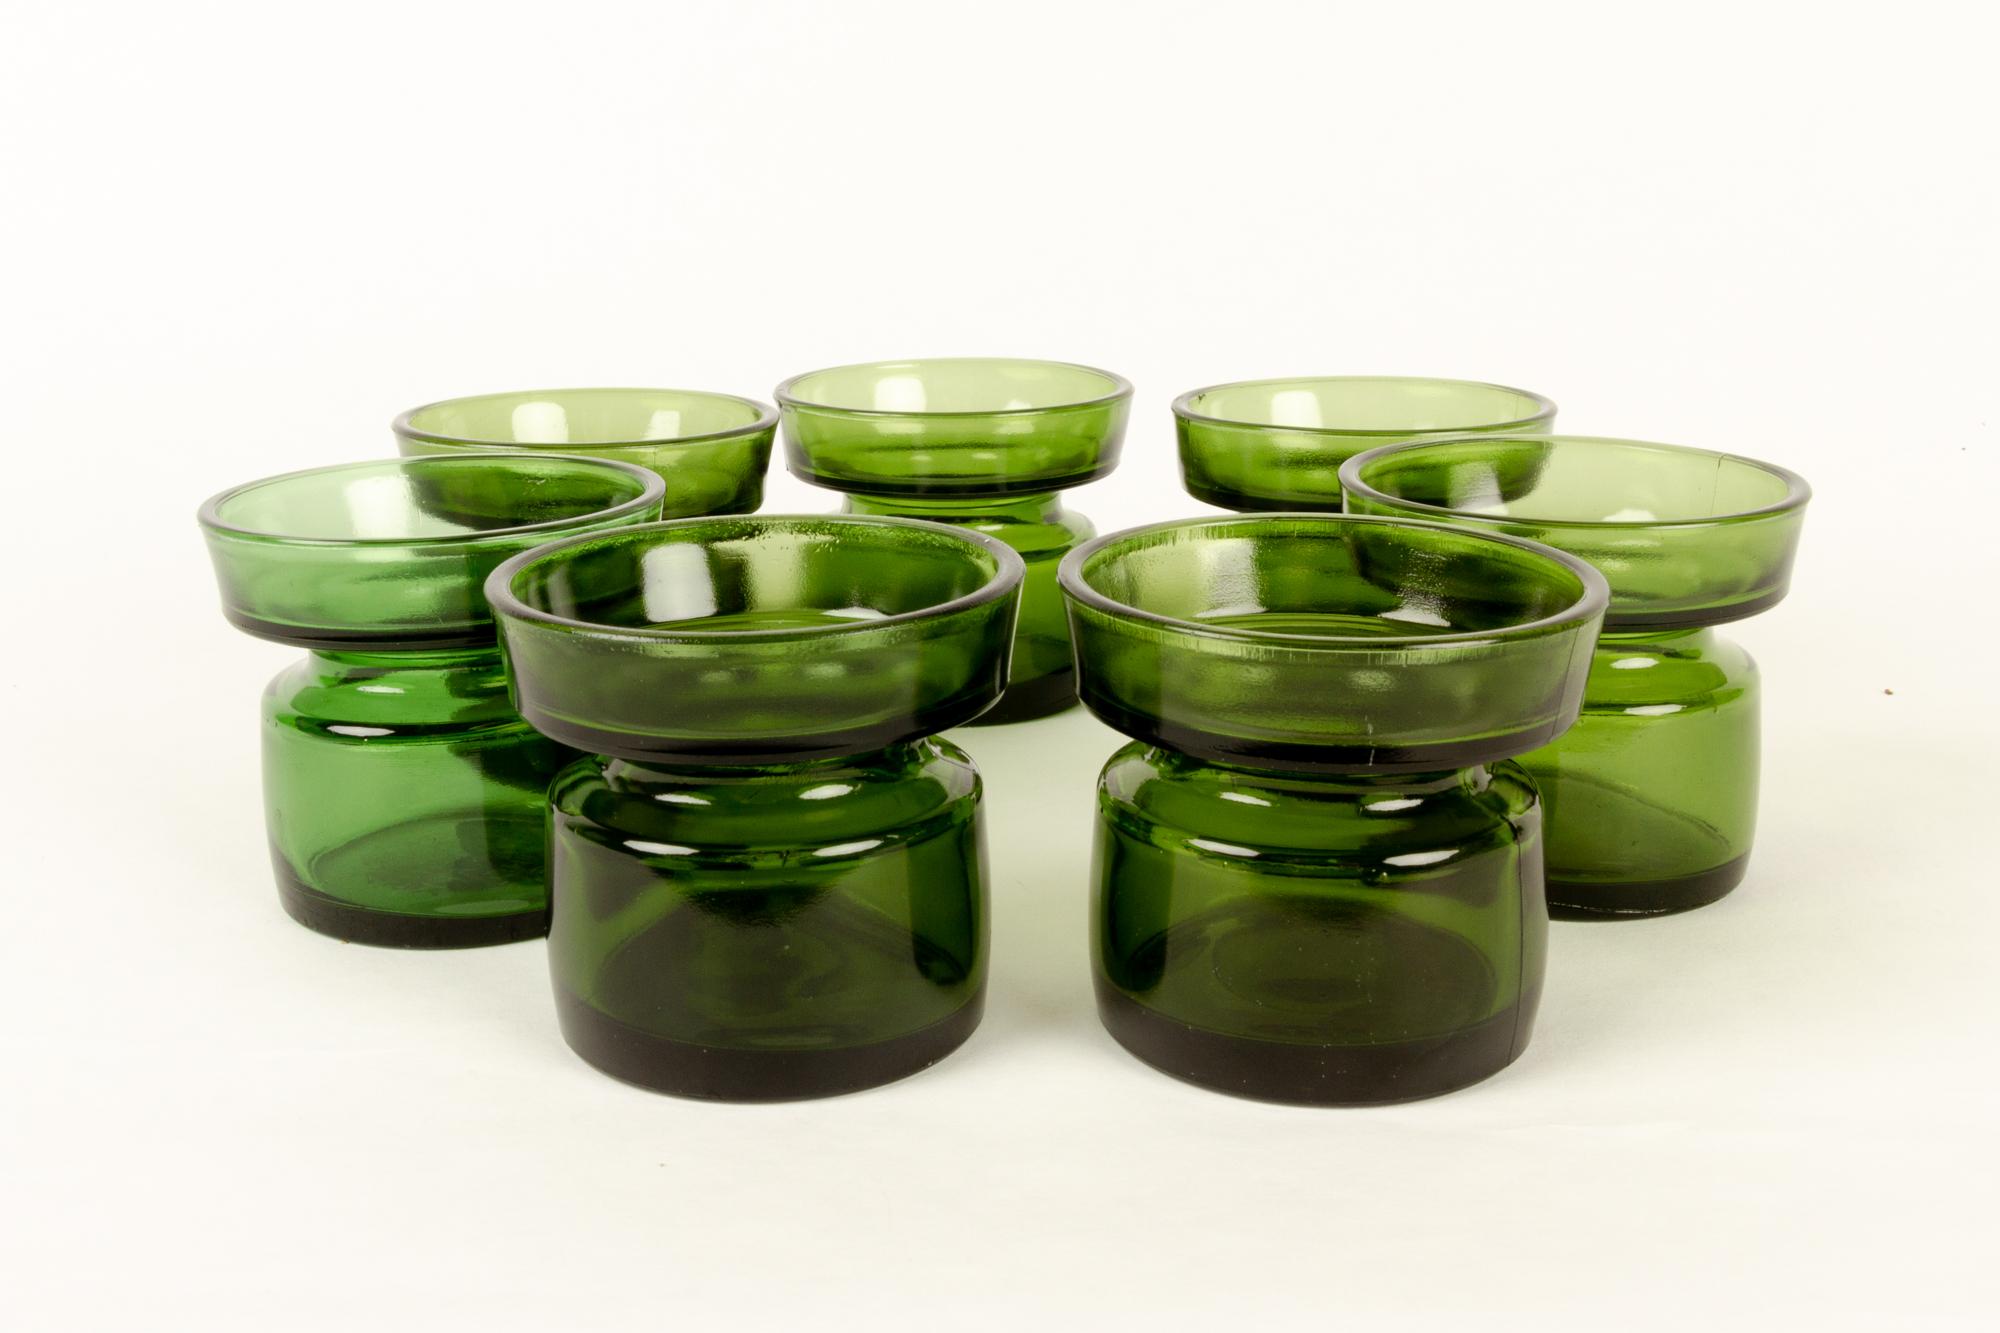 Candleholders by Jens H. Quistgaard for Dansk Designs 1960s set of 7
Set of seven green glass candleholders designed by Danish designer Jens Harald Quistgaard also known as IHQ. Different nuances of green. Makers mark on the bottom: 